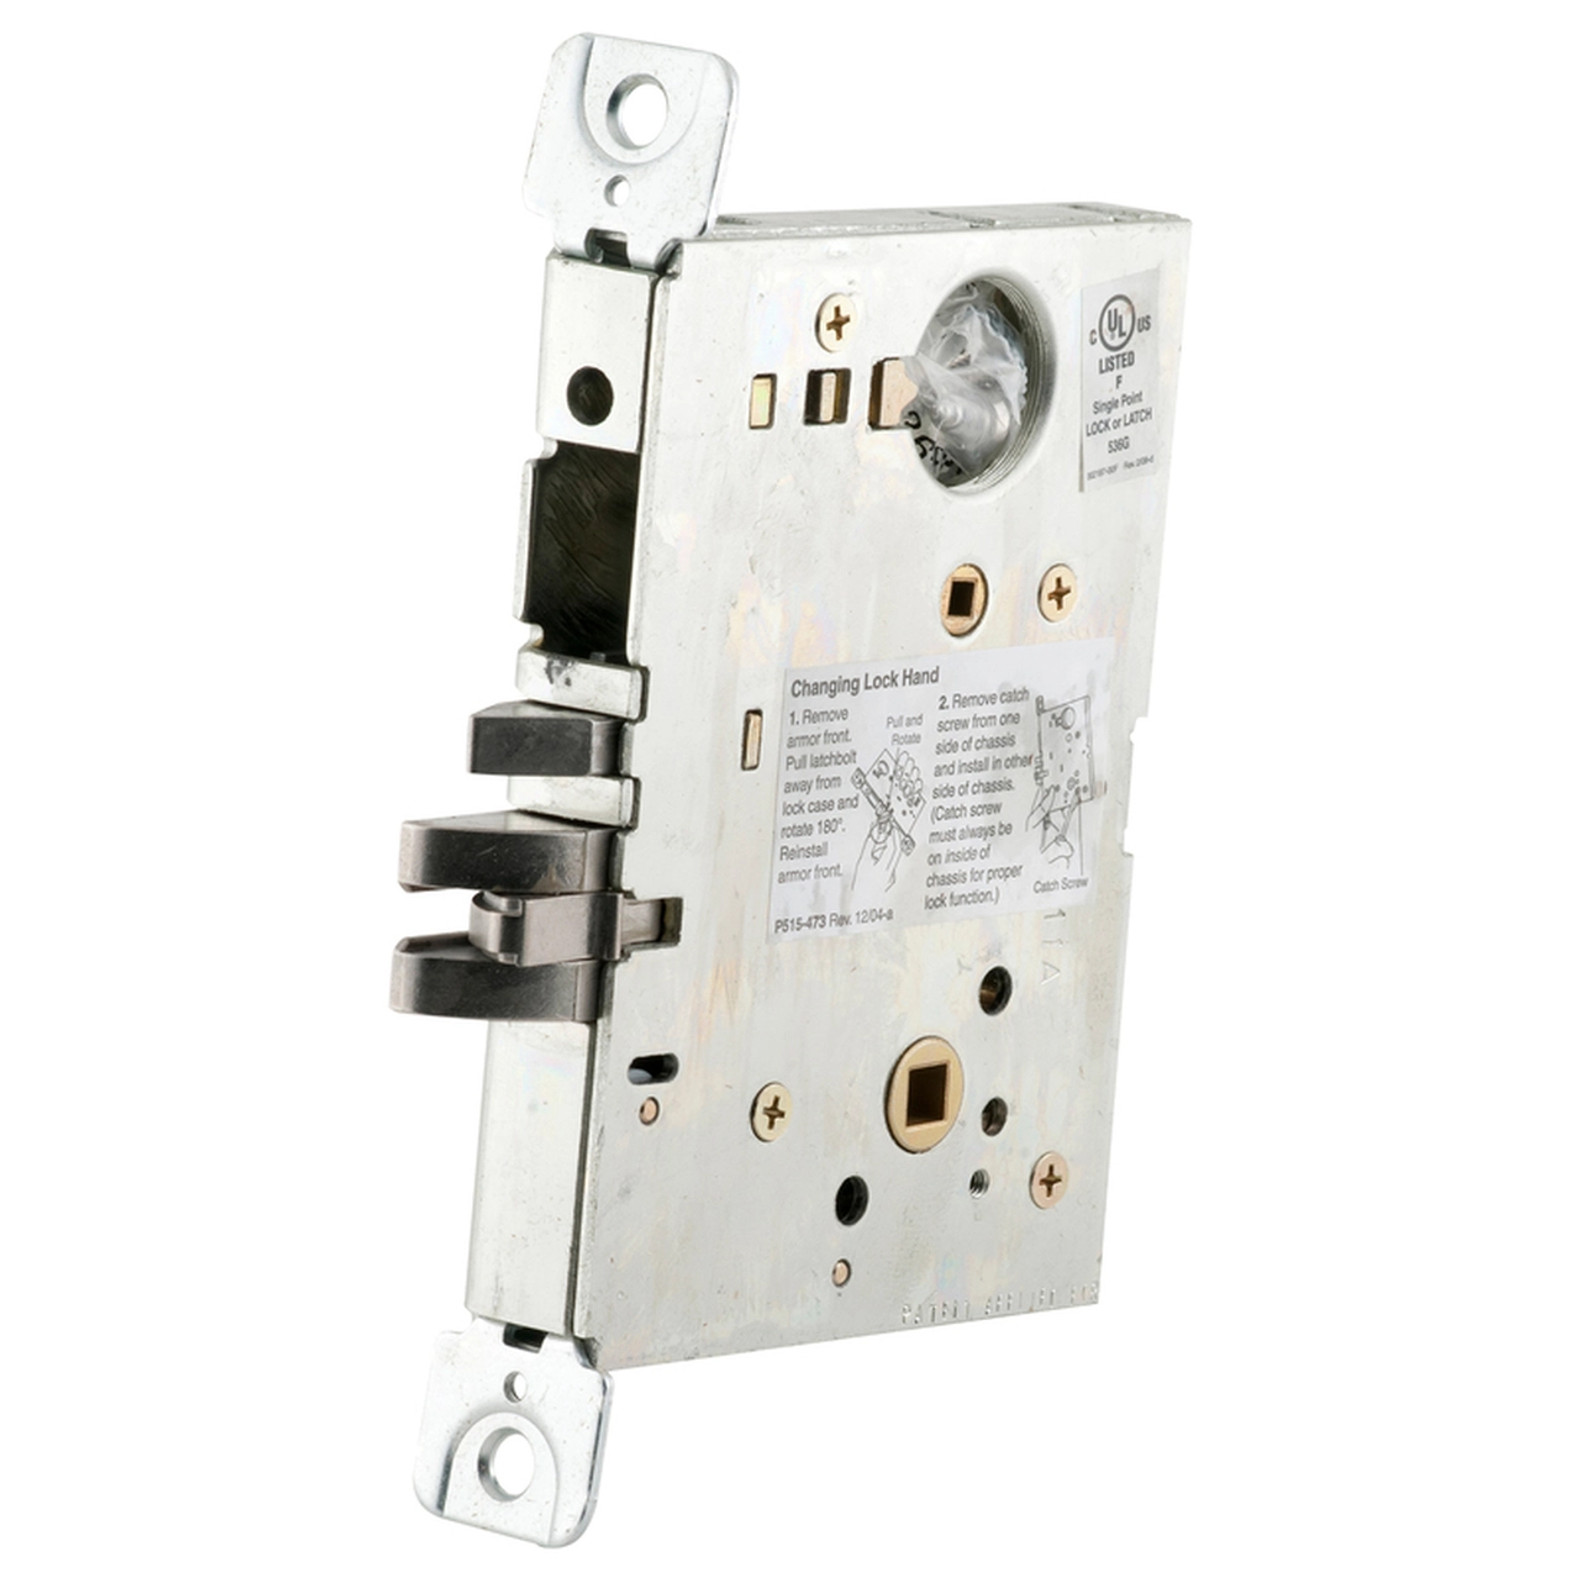 What are the wiring details for the Schlage L9000 mortise RX switch?